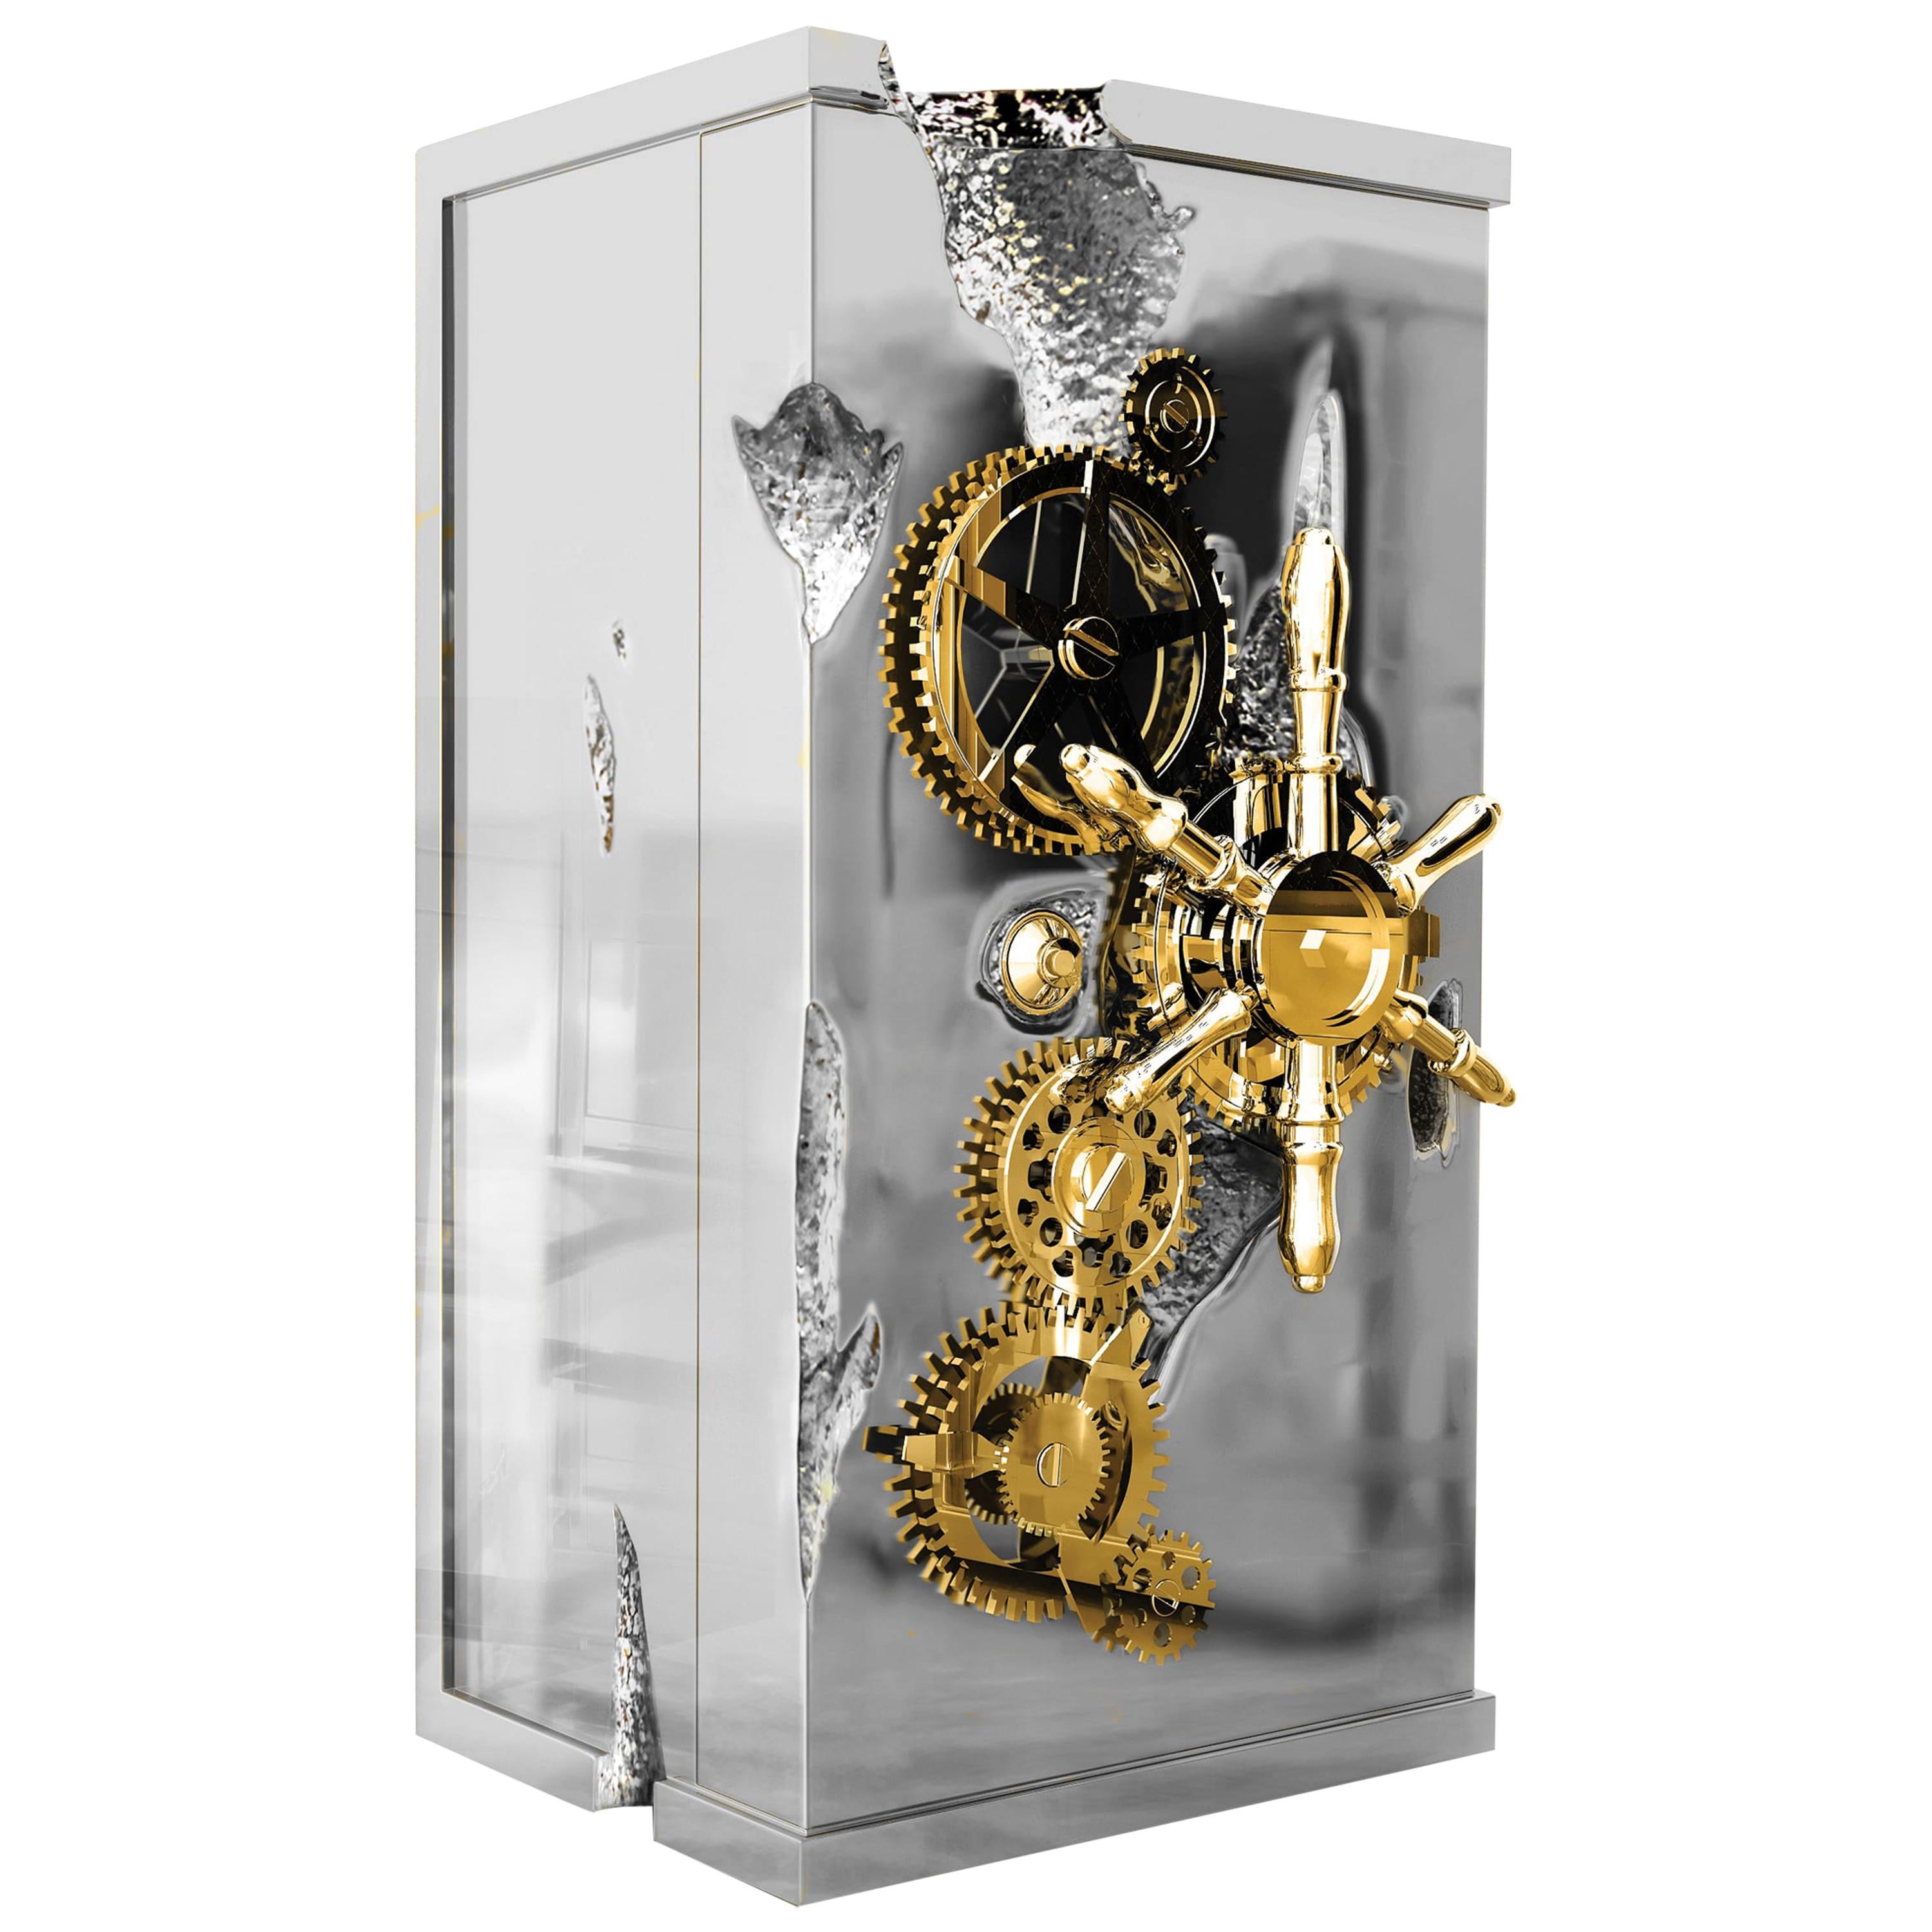 Millionaire Luxury Safe in Silver with Stainless Steel Finish by Boca do Lobo For Sale